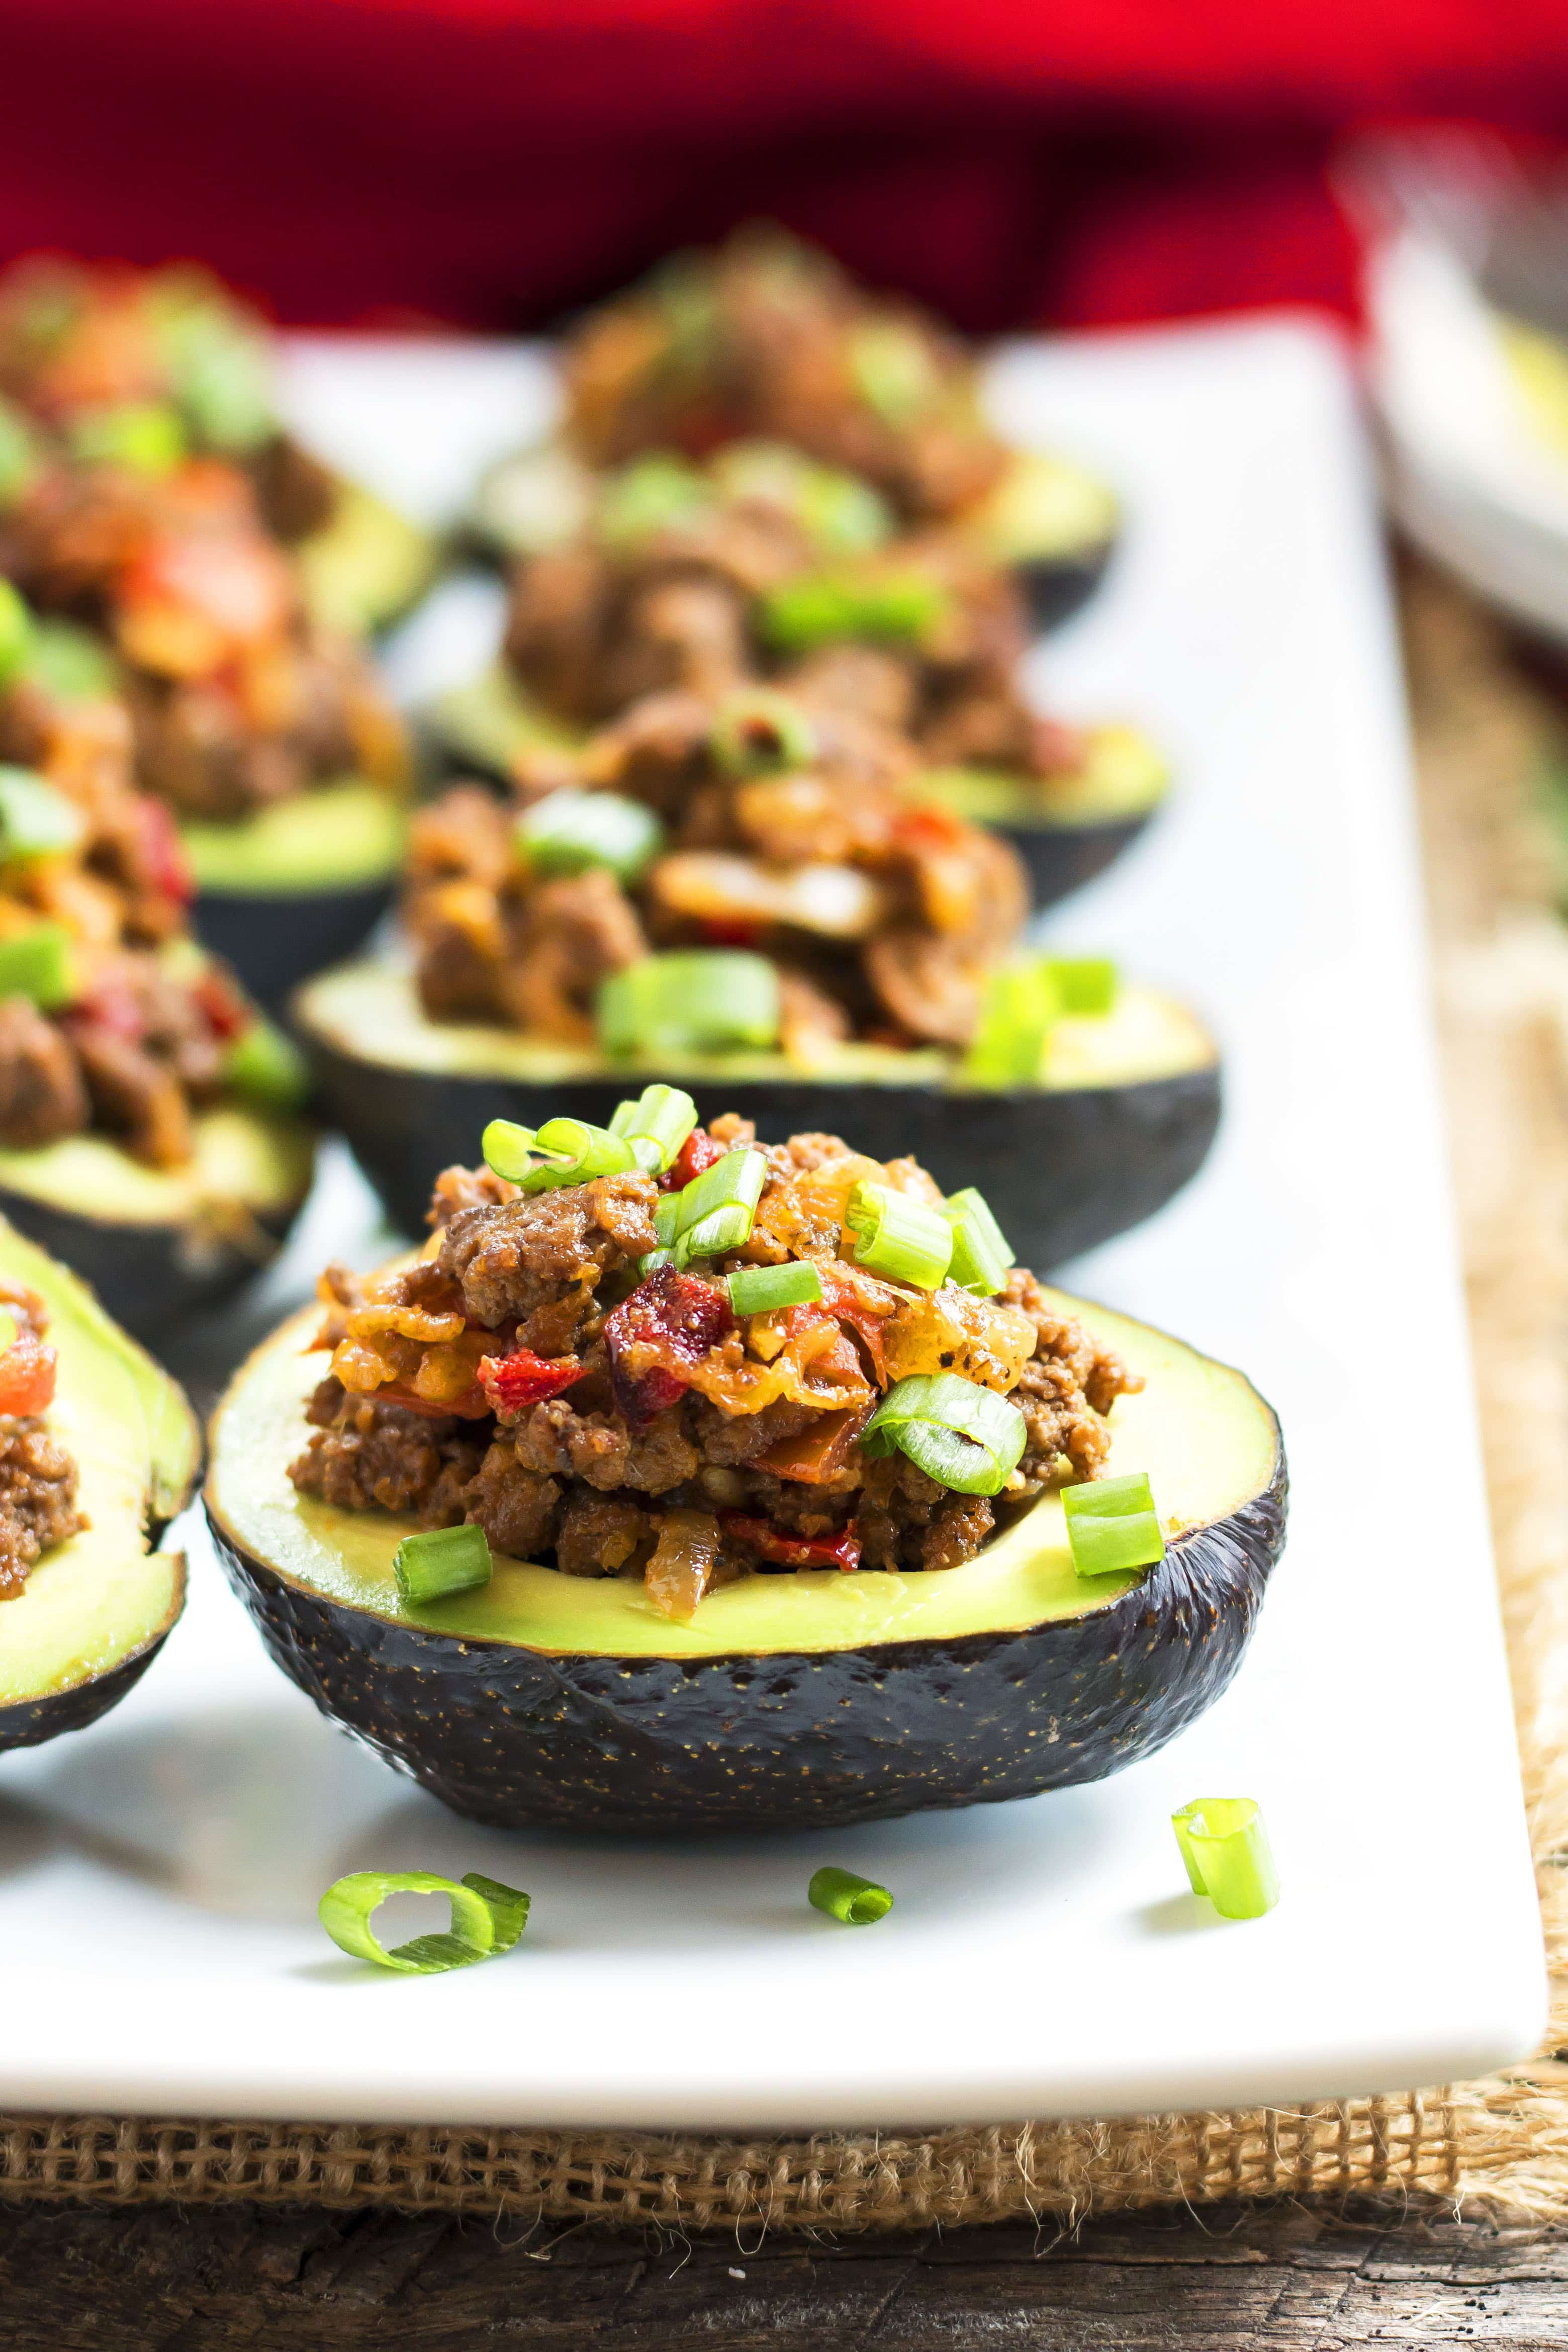 Beef Taco Stuffed Avocados | Gluten Free with L.B.